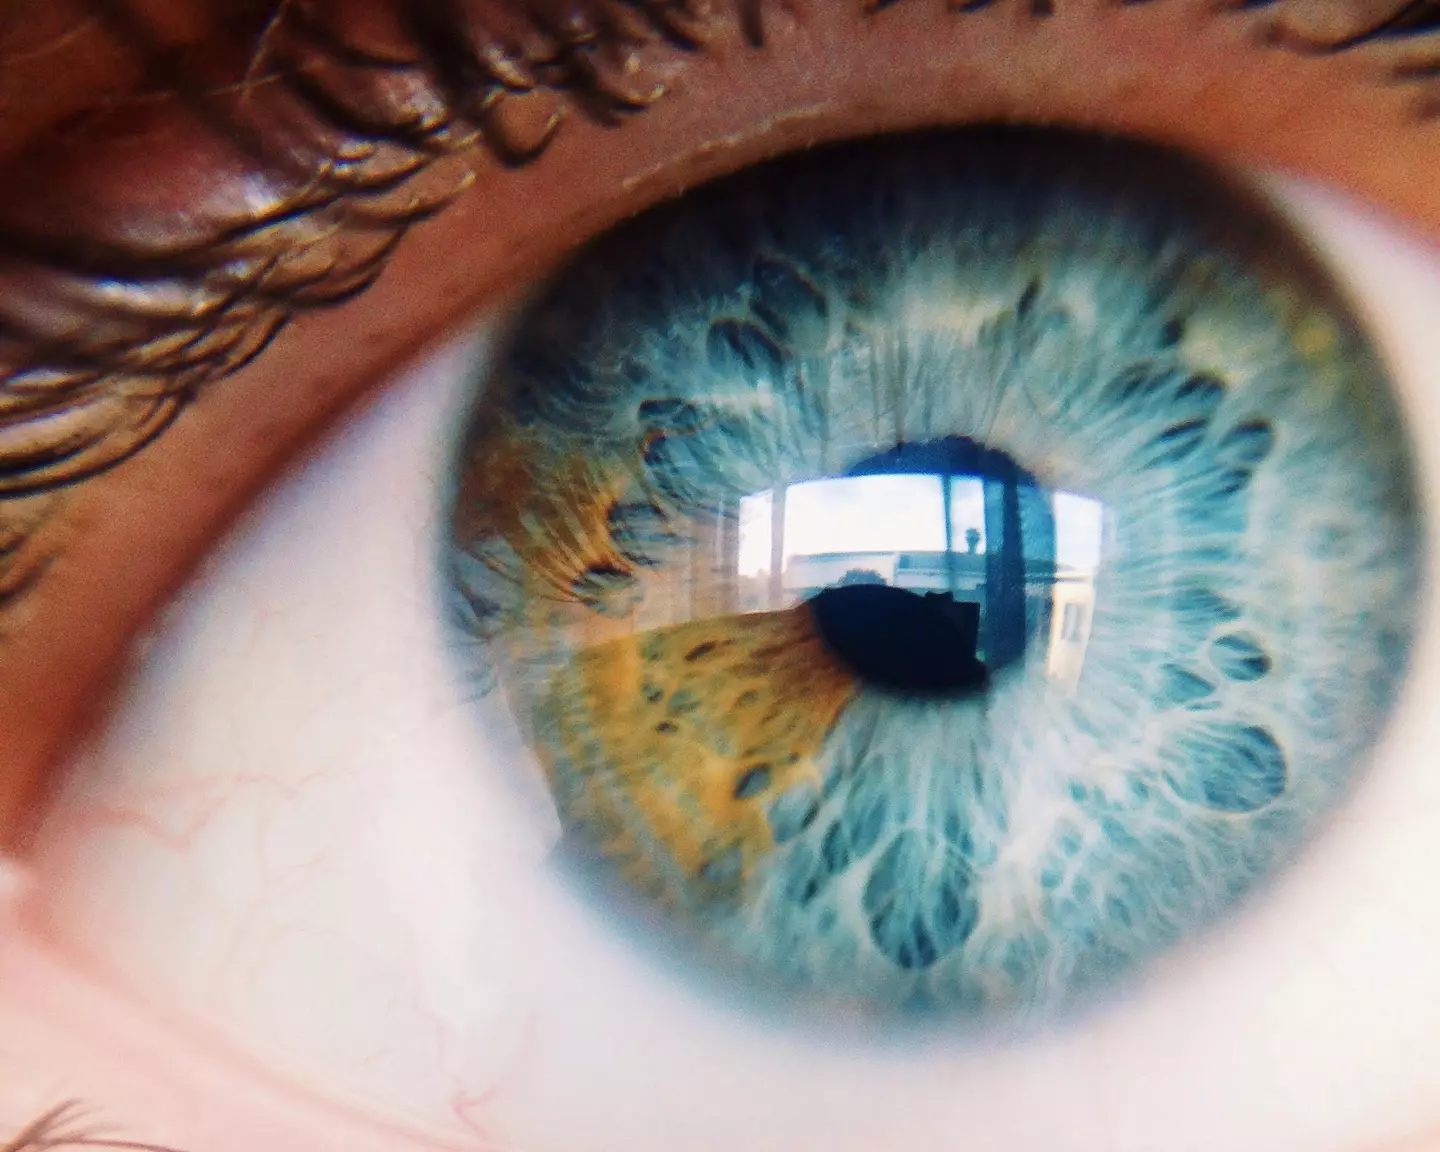 Scientists have brought cells in organ donor eyes back to life.